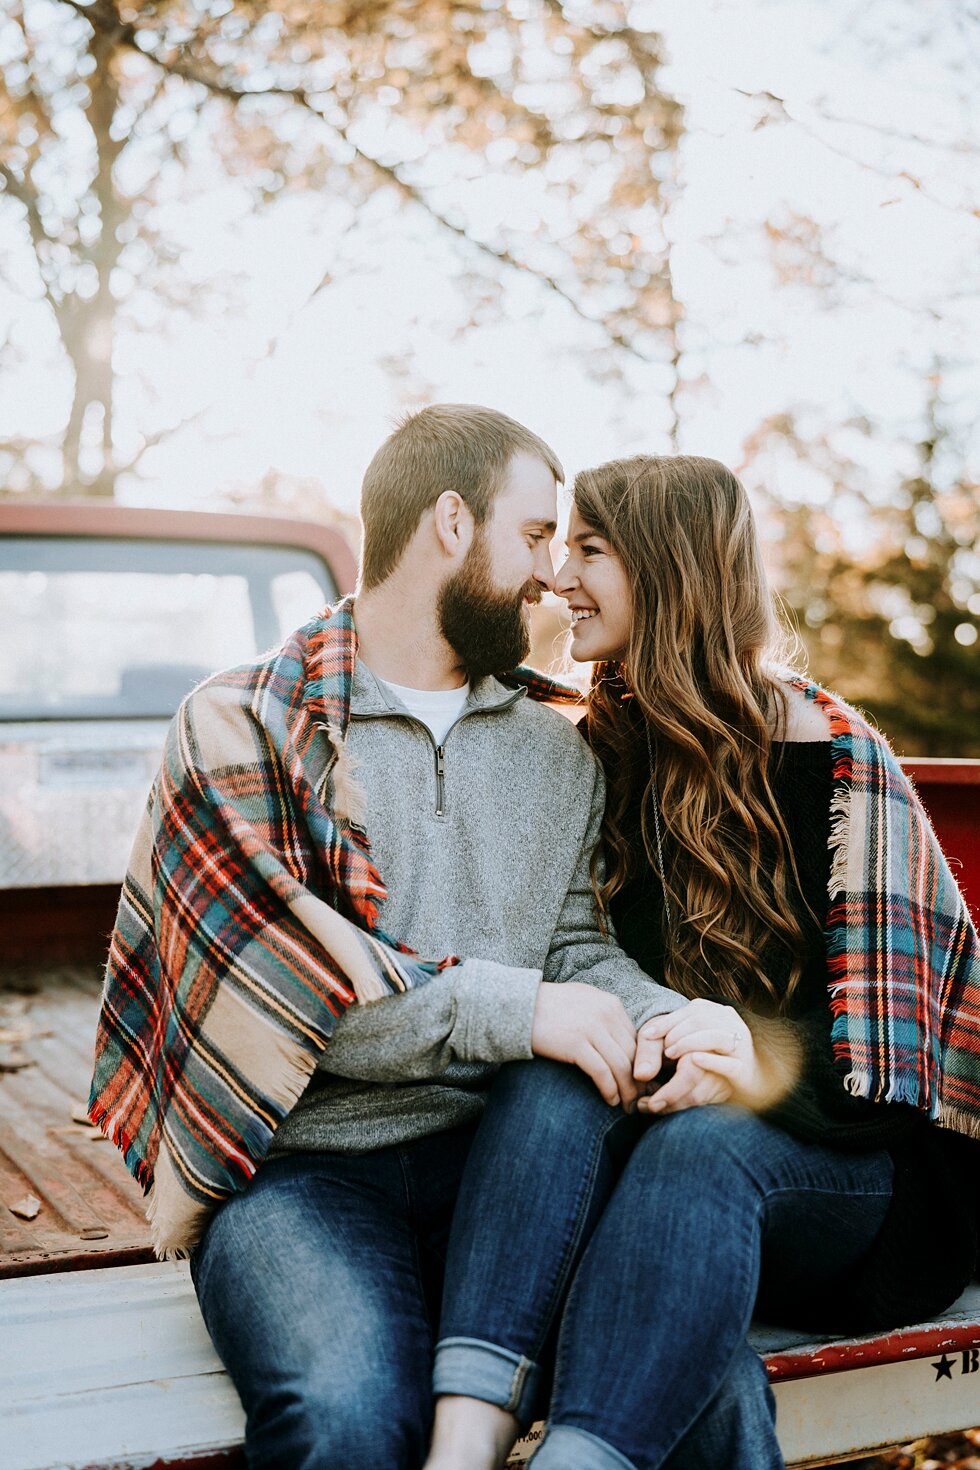  Getting cozy together in the bed of this truck, this engaged couple could not have been cuter! #engagementgoals #engagementphotographer #engaged #outdoorengagement #kentuckyphotographer #indianaphotographer #louisvillephotographer #engagementphotos 